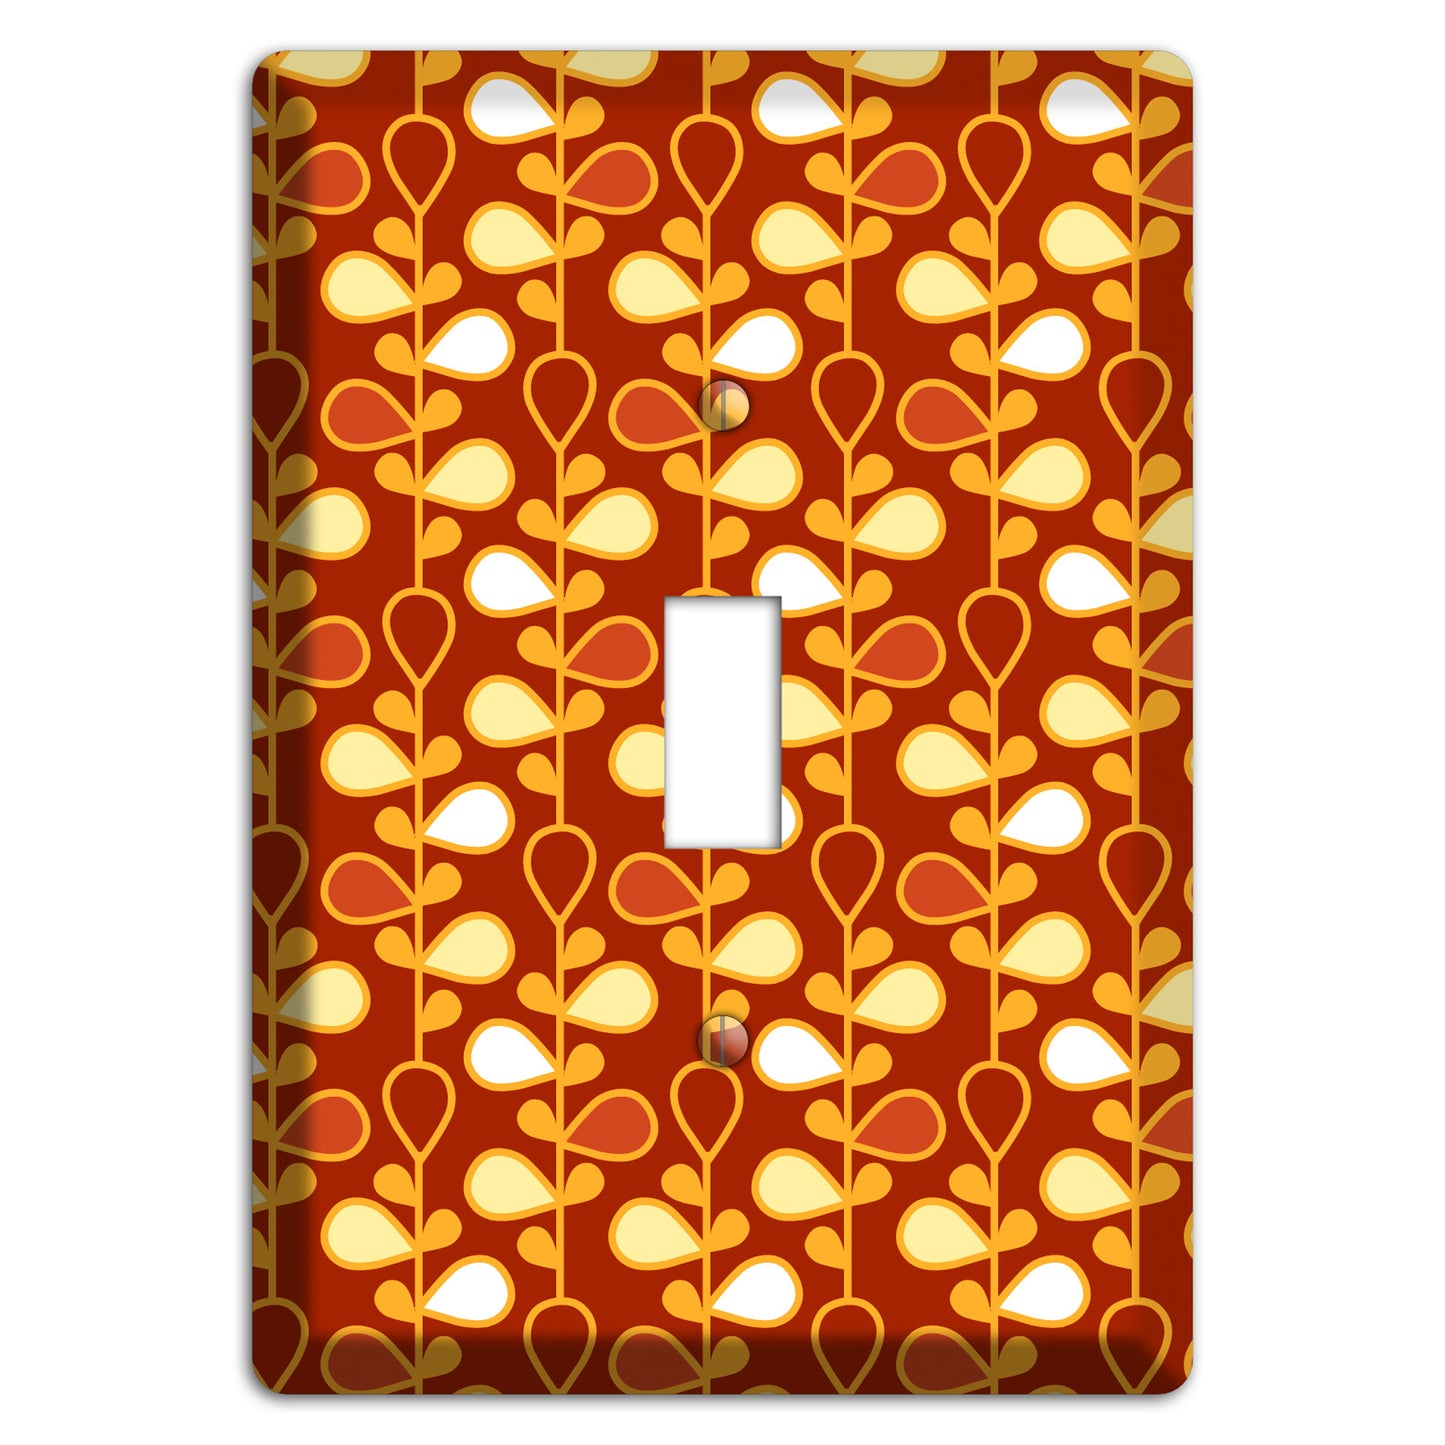 Red with Orange and Yellow Drop and Vine Cover Plates